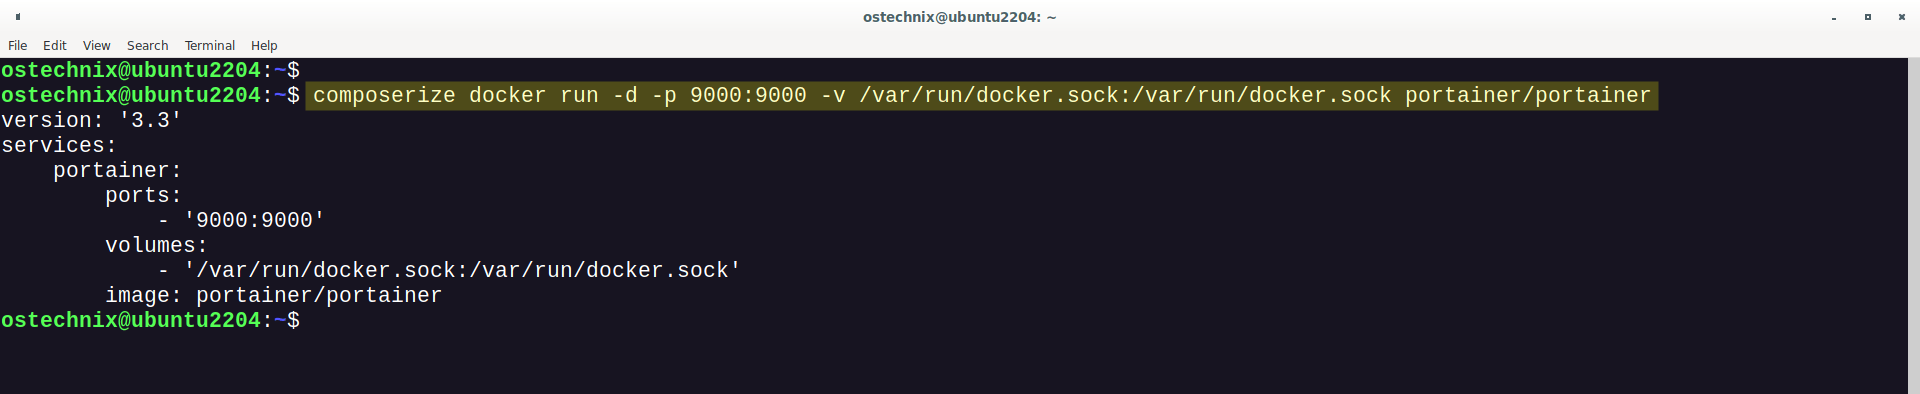 Convert Docker Run Commands Into Docker-Compose Files With Composerize